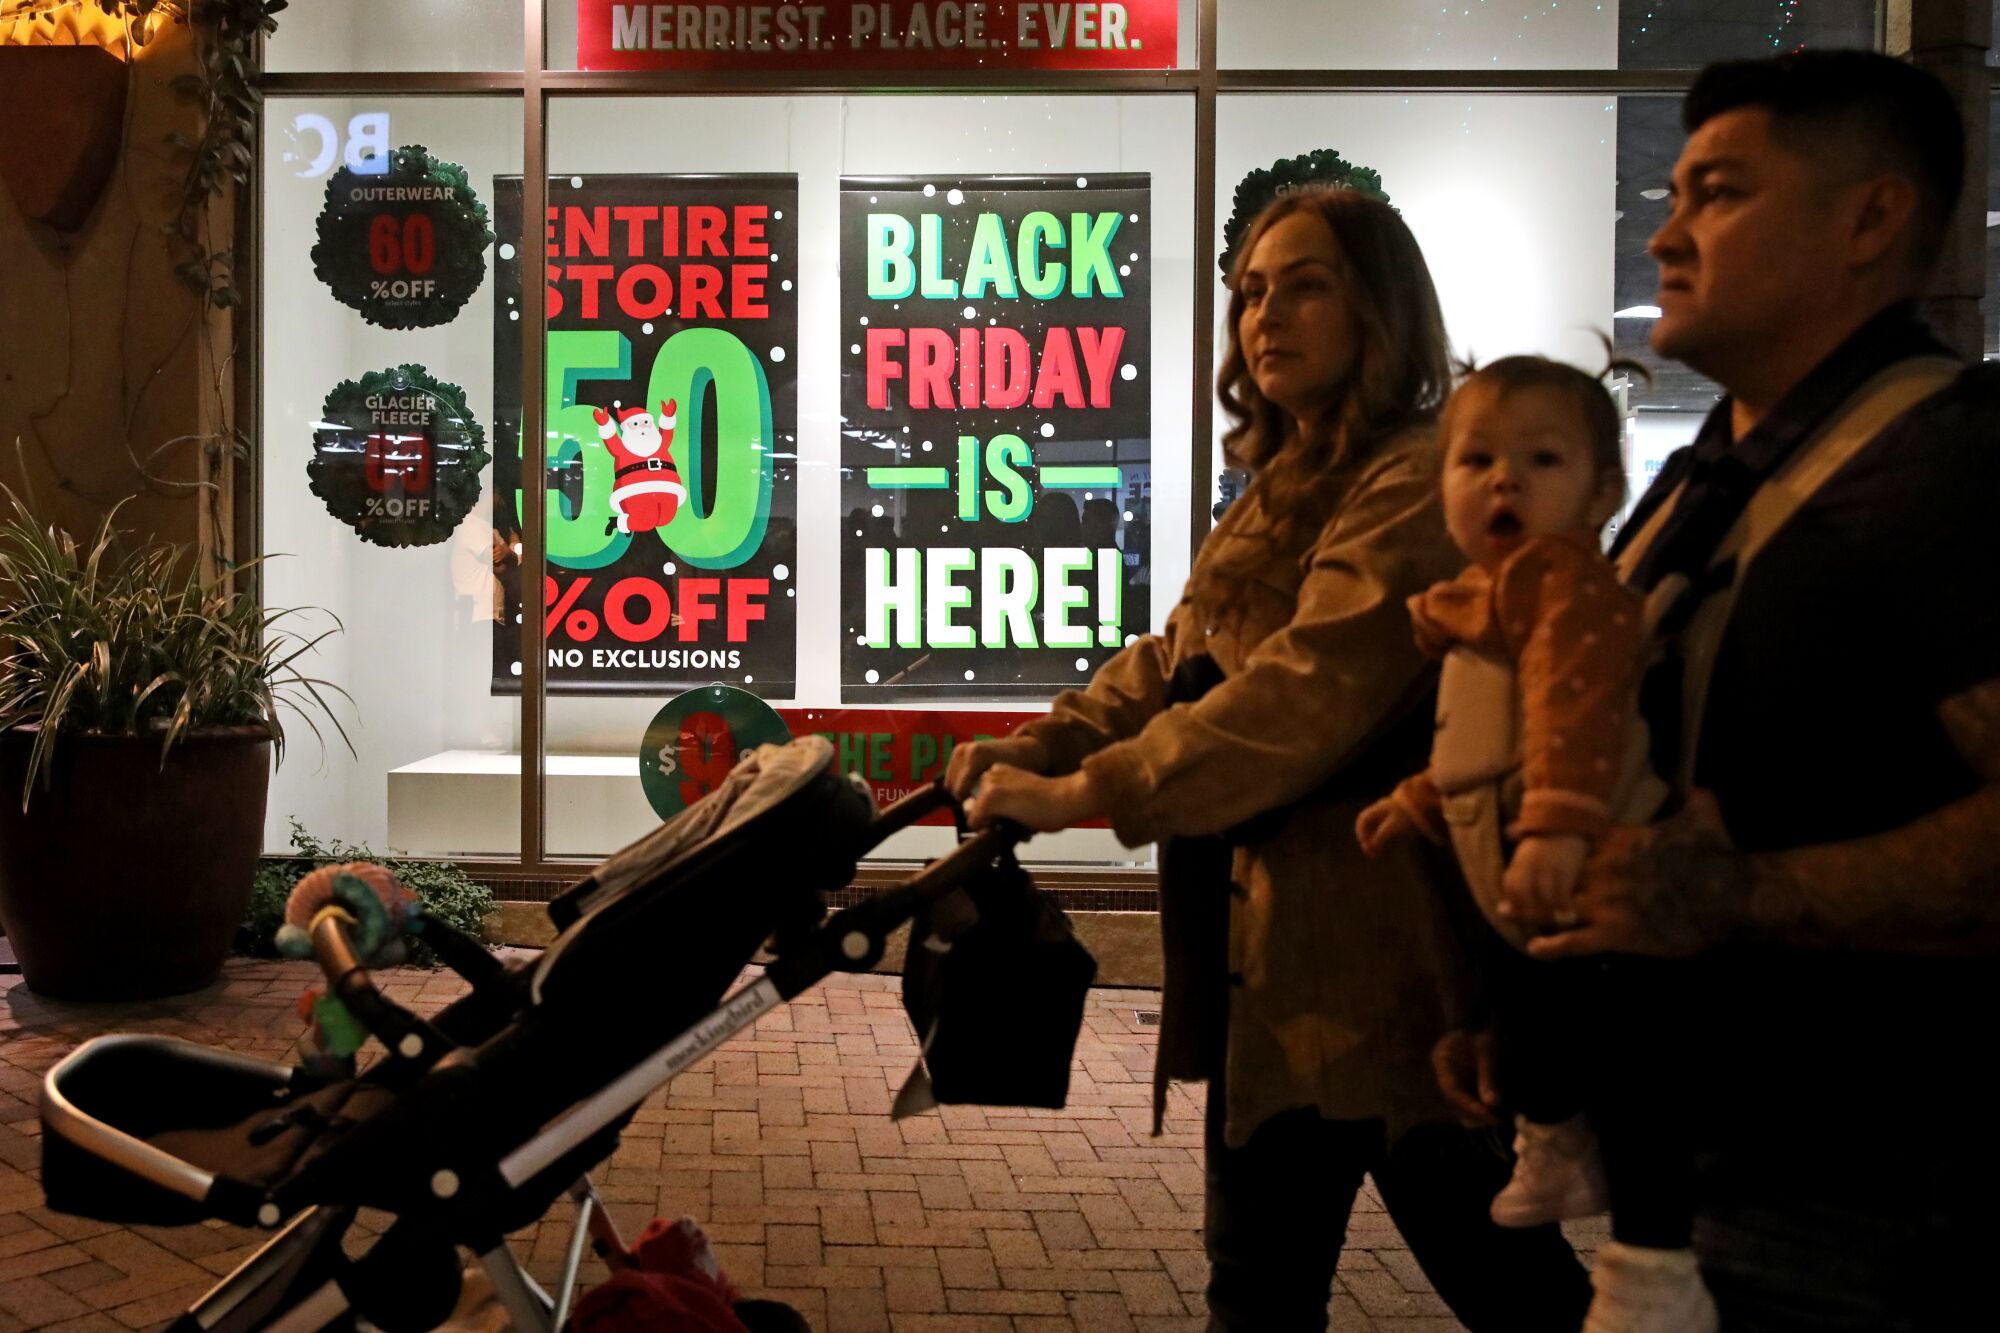 Photos: Here’s what you missed if you didn’t do your Christmas shopping on Black Friday